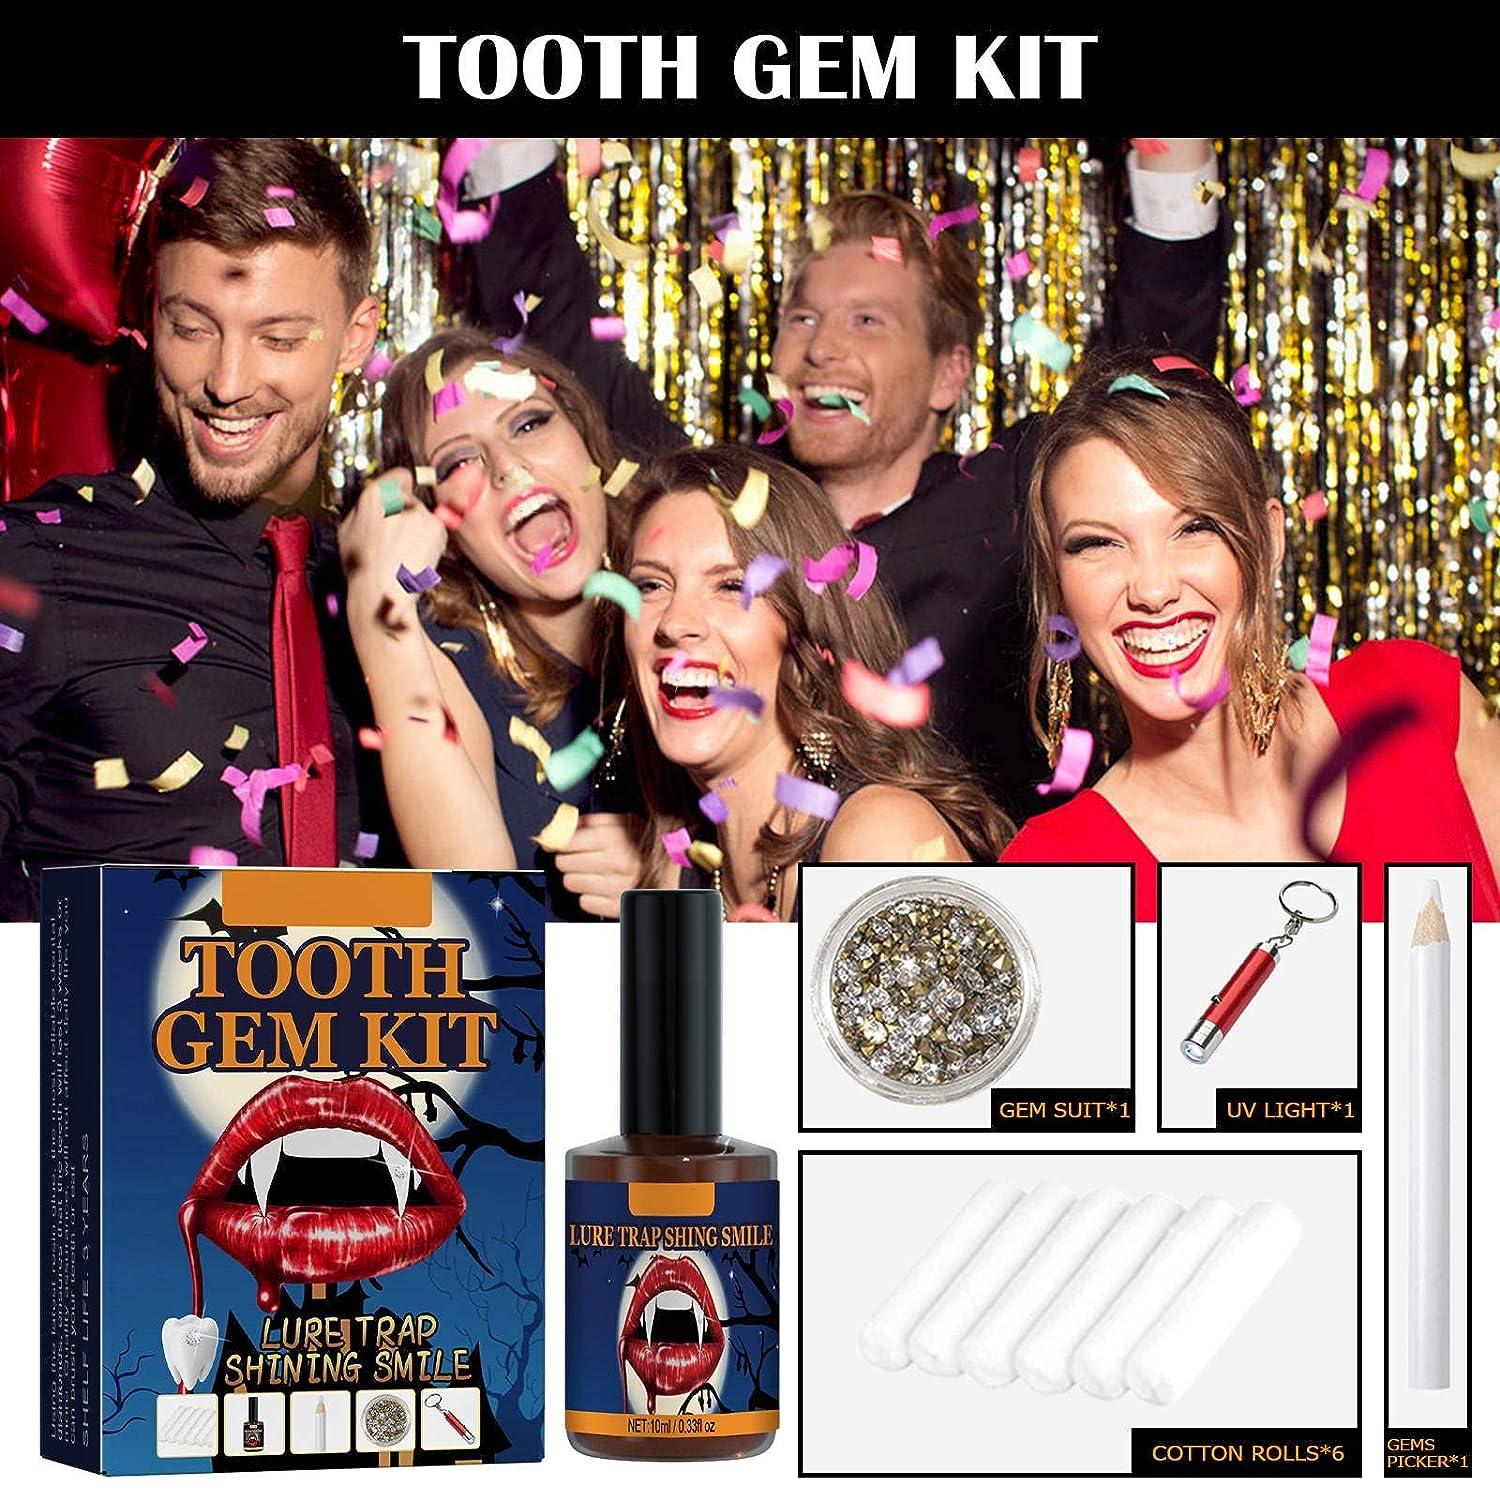 Halloween Teeth Gem Kit DIY Teeth Gem Kit With Curing Light And Glue 20  Pieces For Reflective Teeth Decoration Shiny Crystal Diamonds Holiday Party  Teeth Gem 20ml Toothbrush (Rose Gold, One Size)